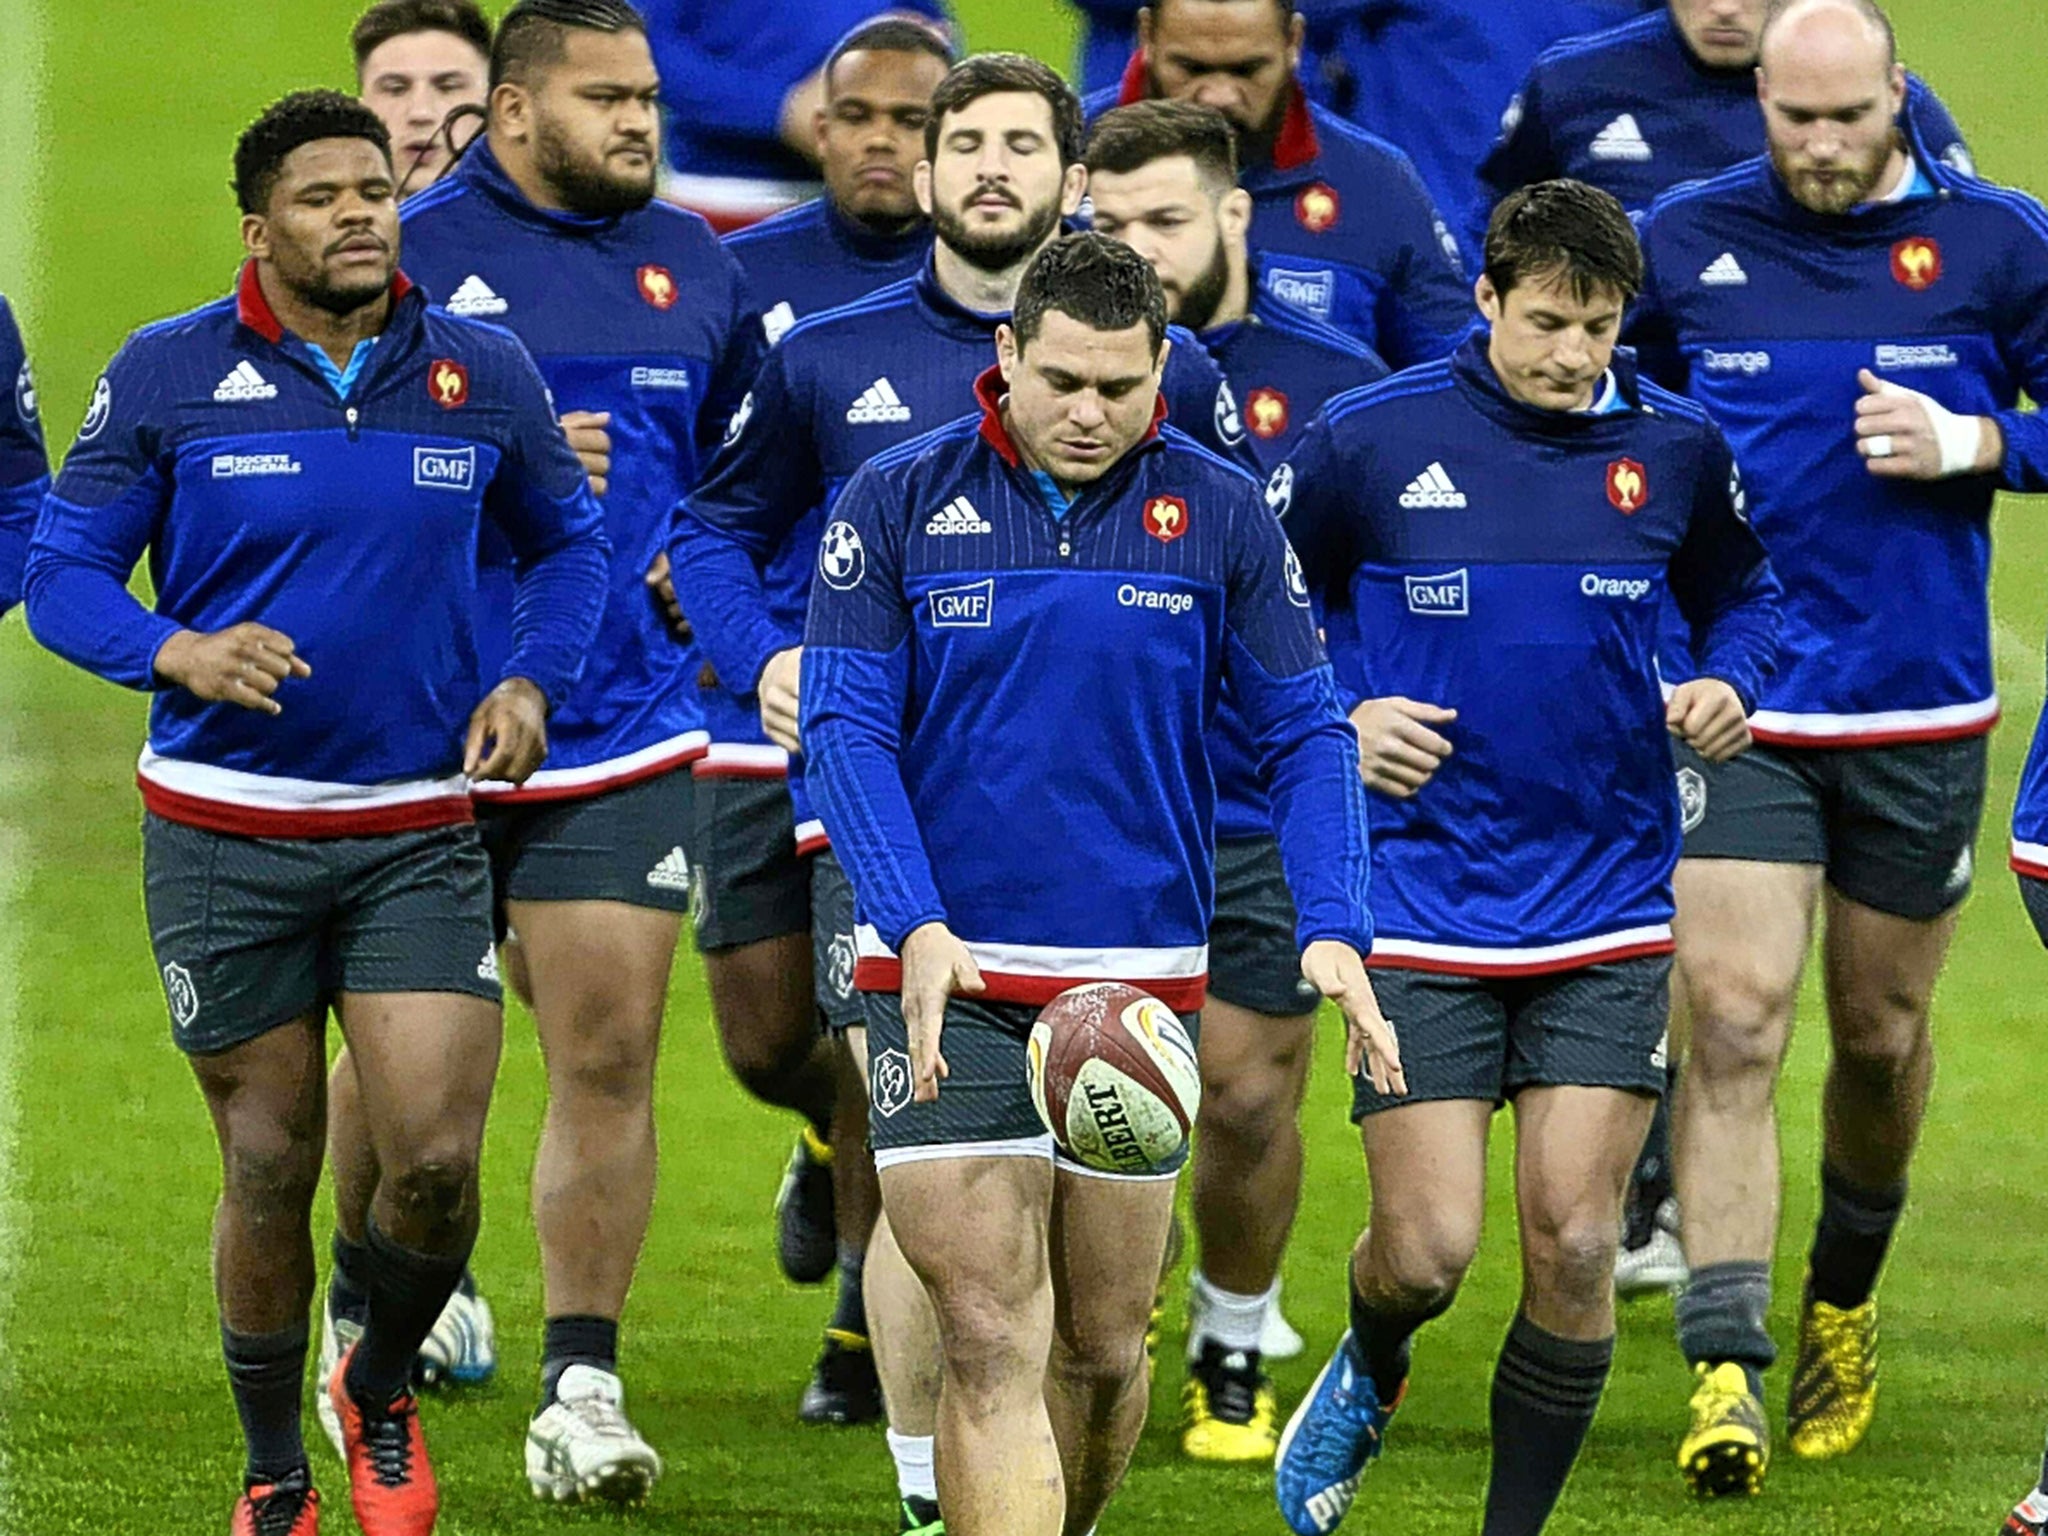 The France captain, Guilhem Guirado, leads the way during training at the Millennium Stadium